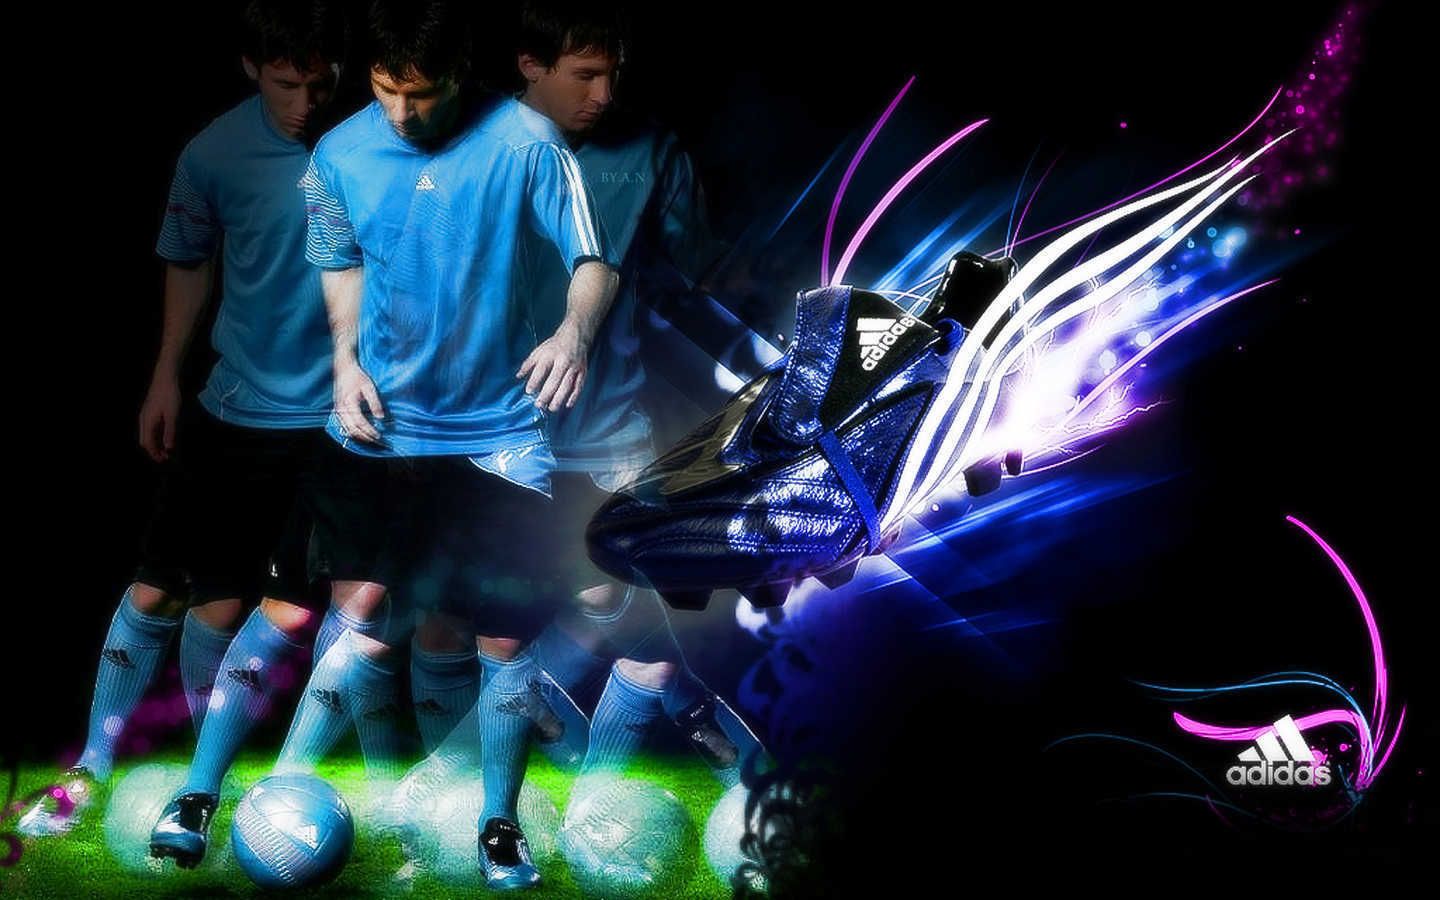 Lionel Messi Adidas Shoe Wallpaper Lionel Messi Wallpapers